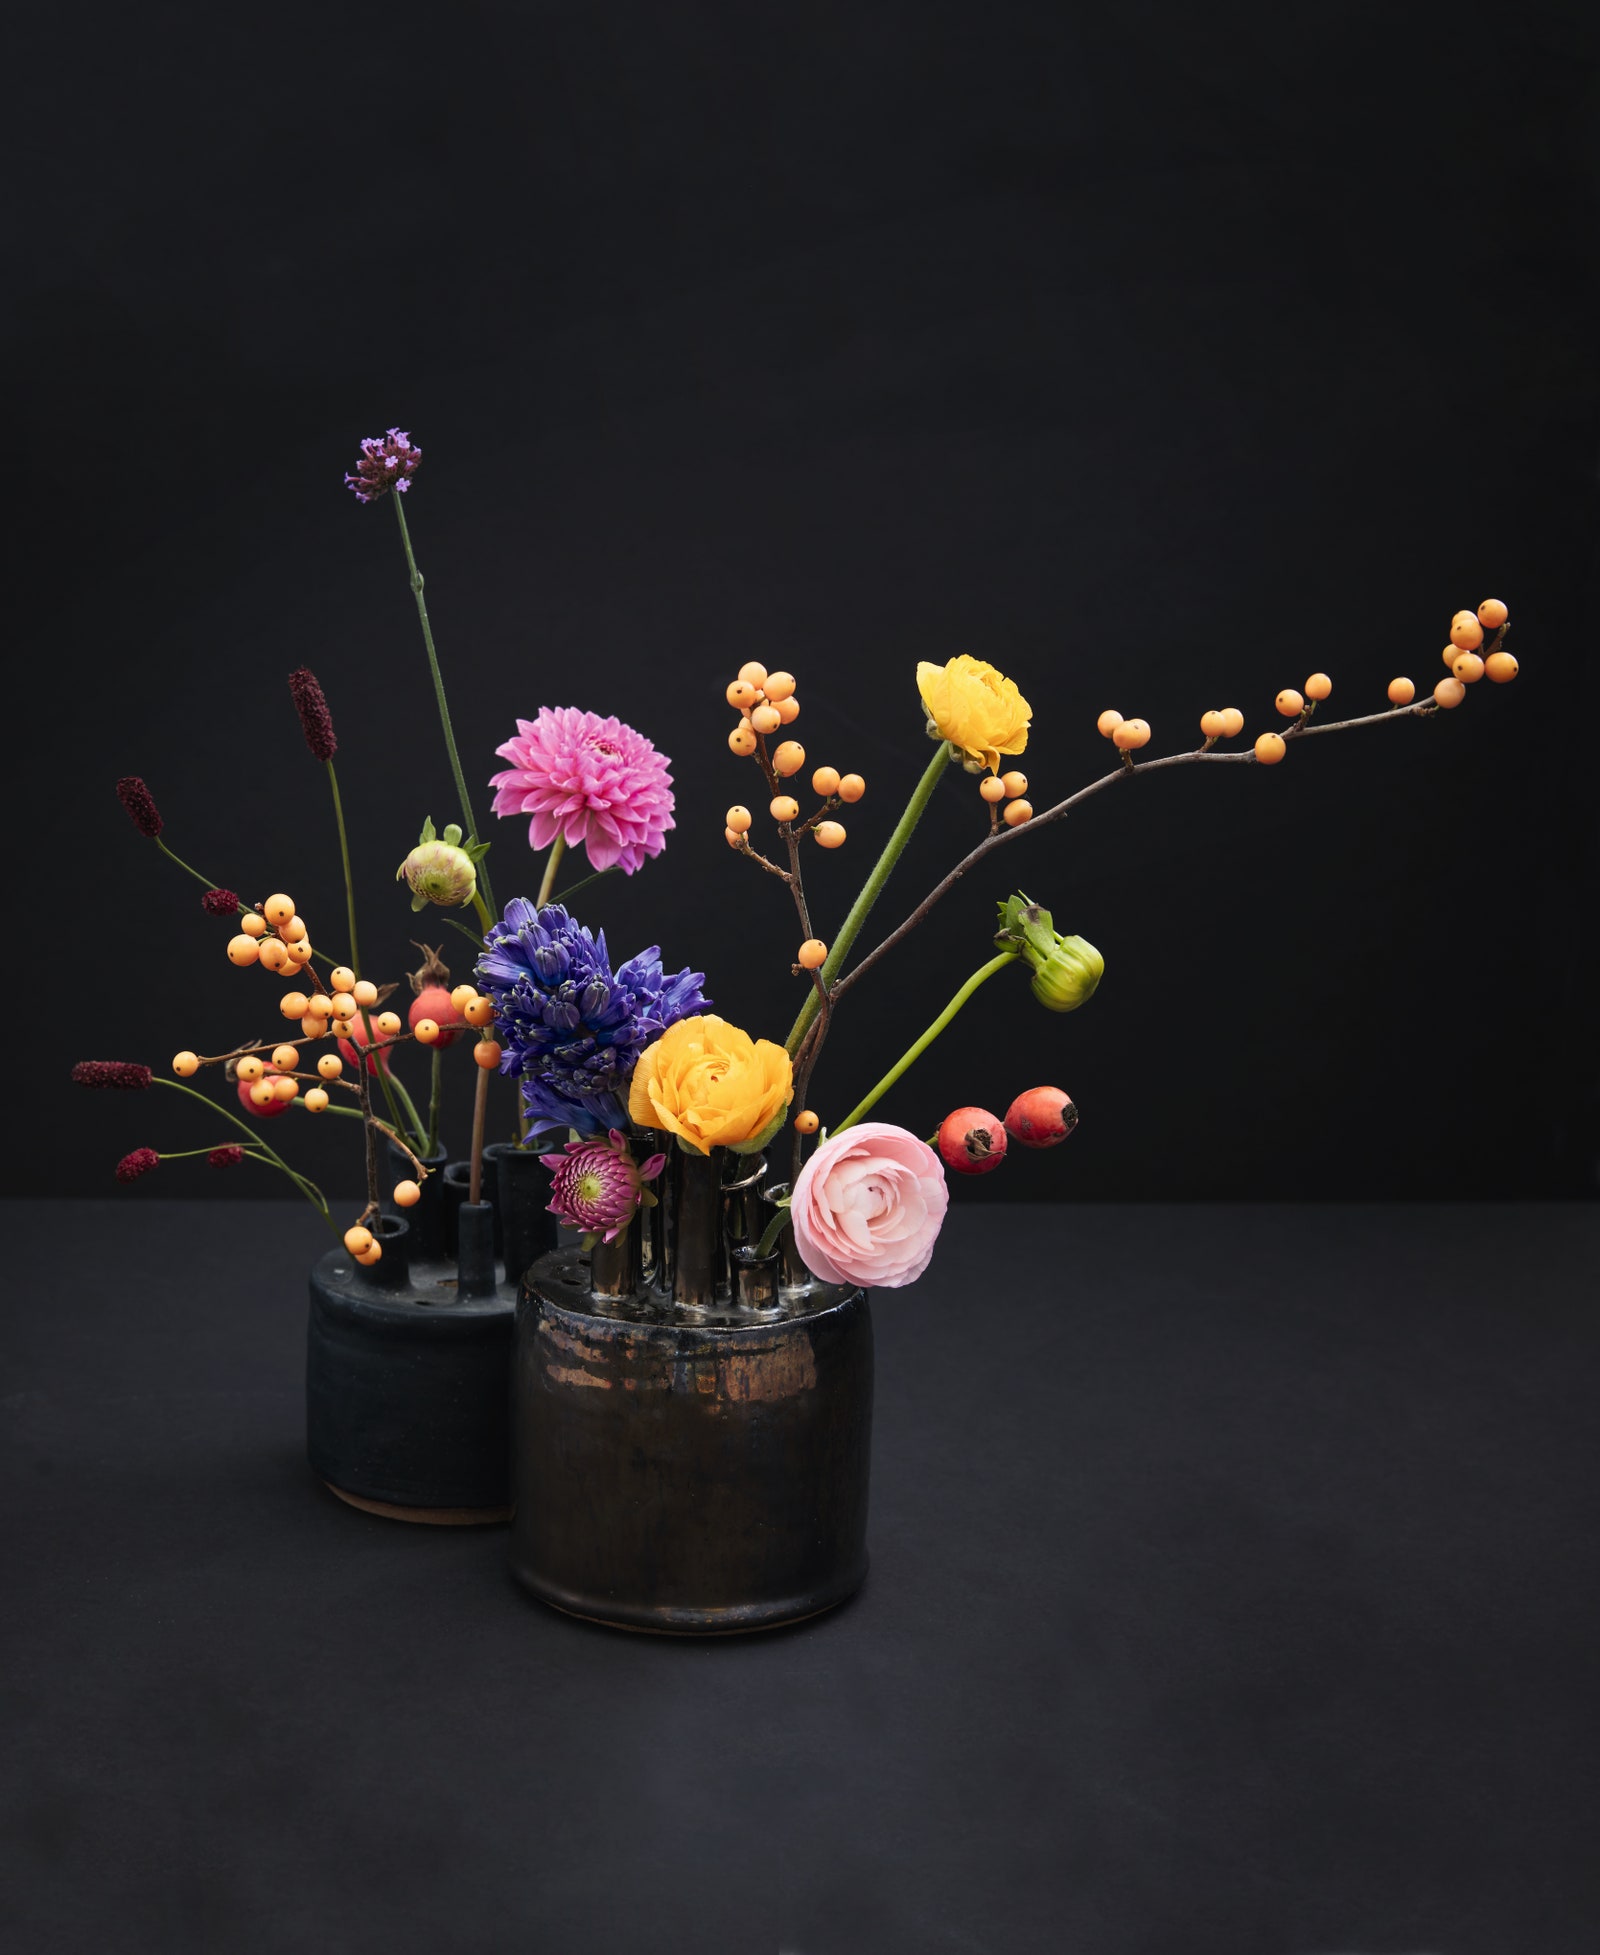 Taylors riff on Several Circles puts the deep purple of hyacinths and spherical forms of dahlias ranunculus rosehips and...